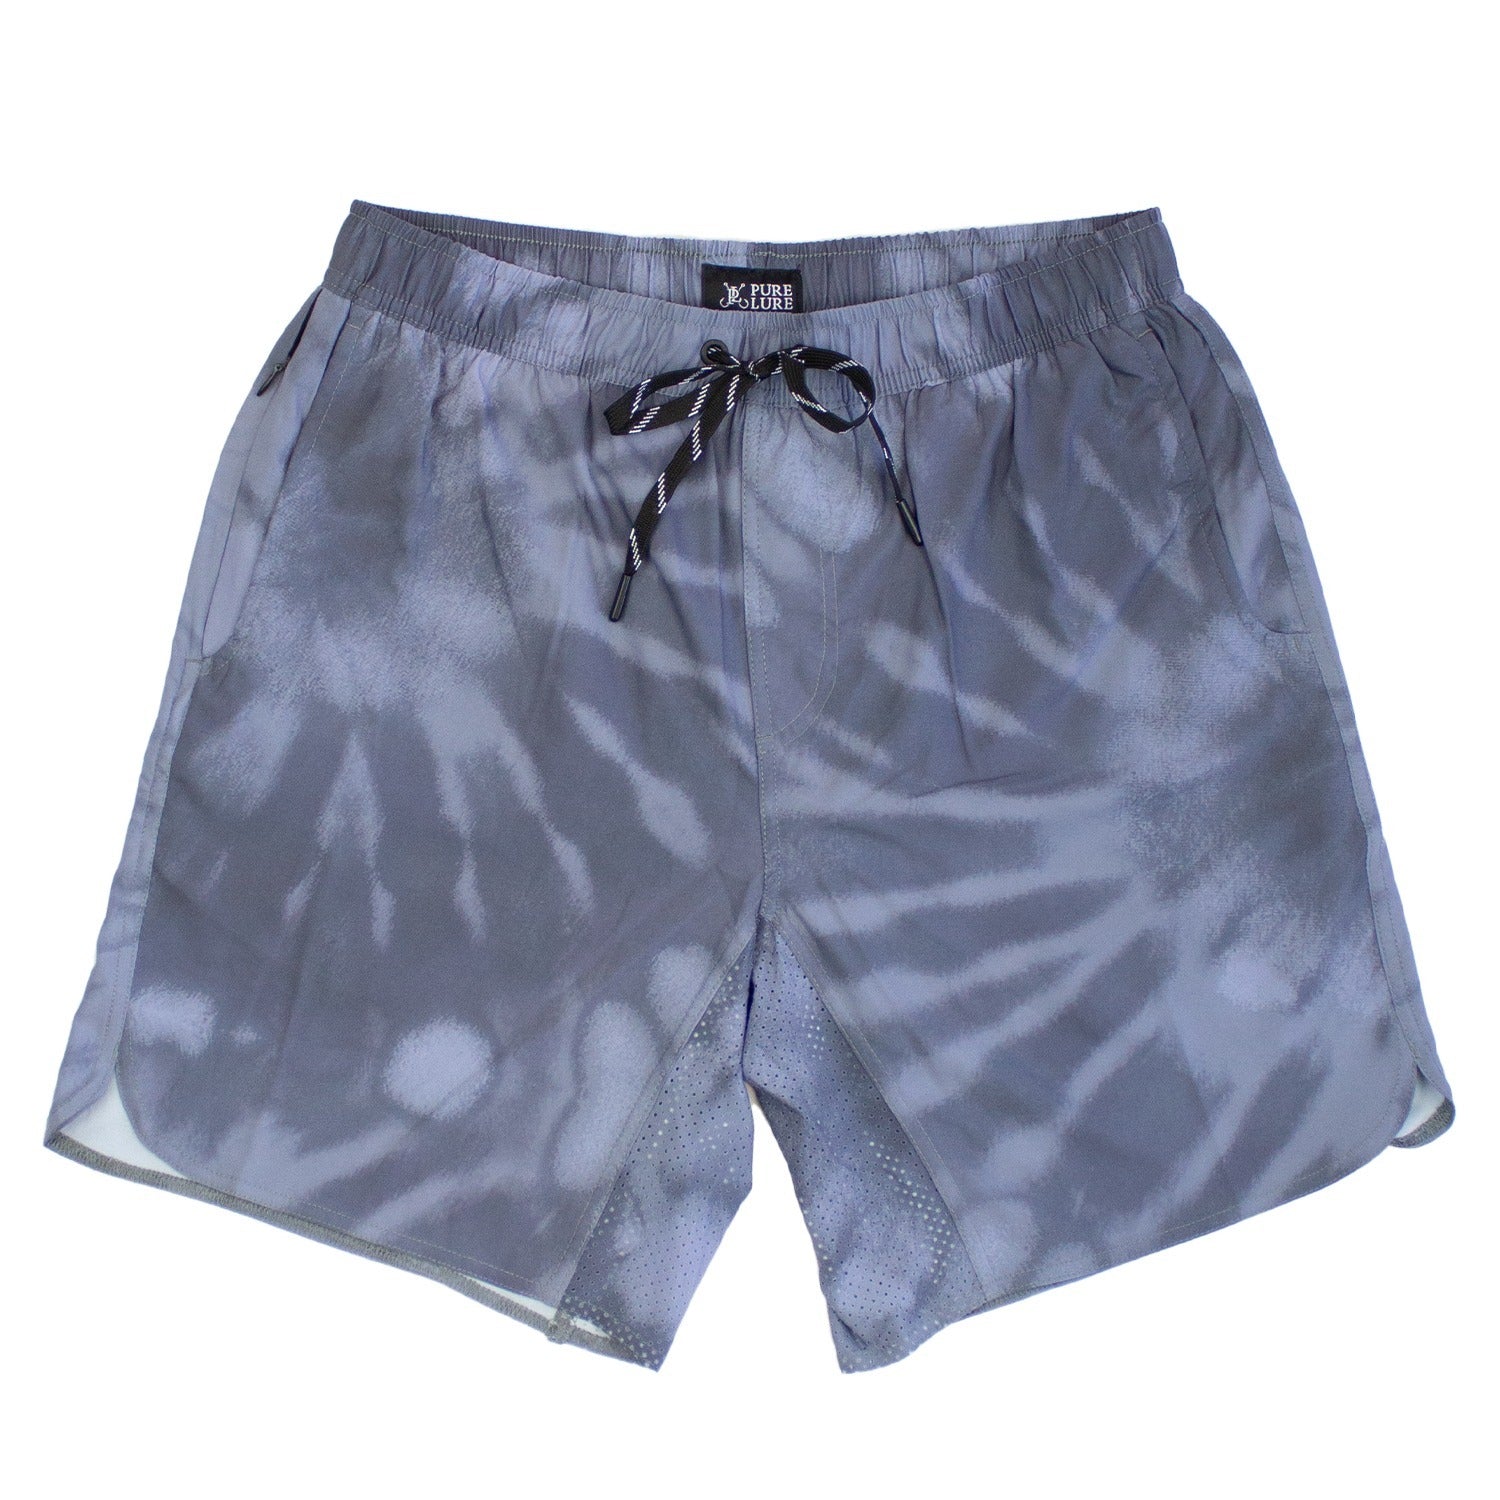 Pure Lure | Reel Fishing Gear Hull, Lightweight Shorts with An Internal Compression Lining for Maximum Comfort. Purple Tie Dye / L